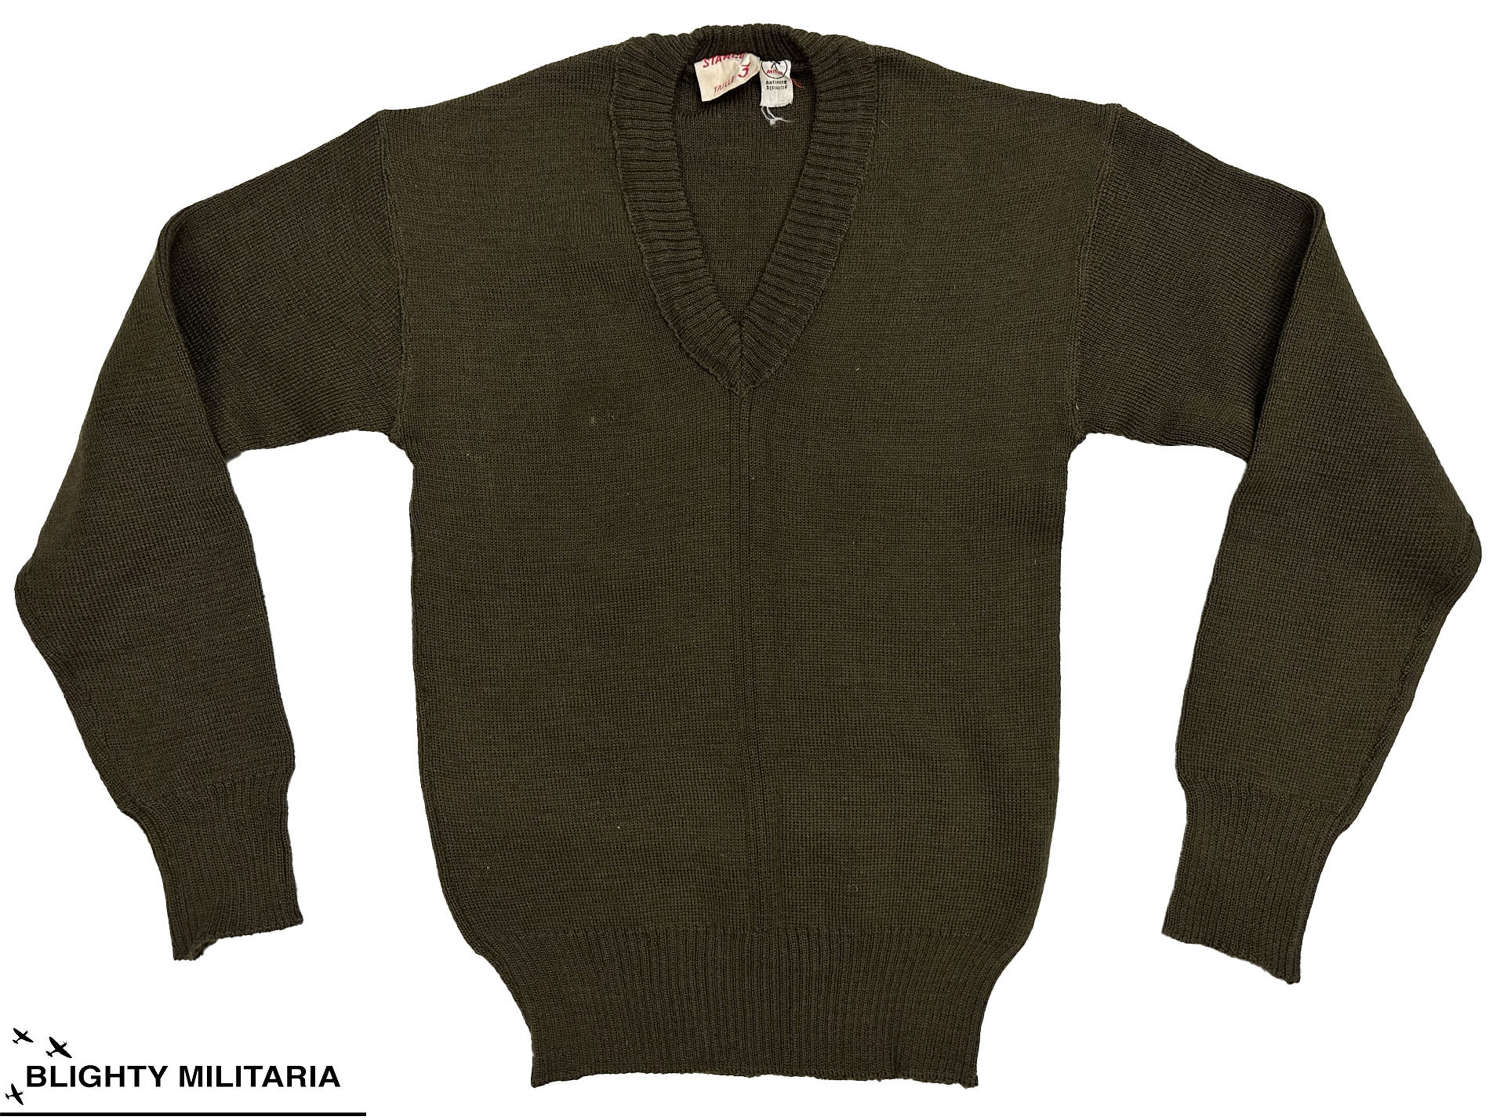 Original 1950s French Army Green Wool V-Neck Sweater - Size 3 34